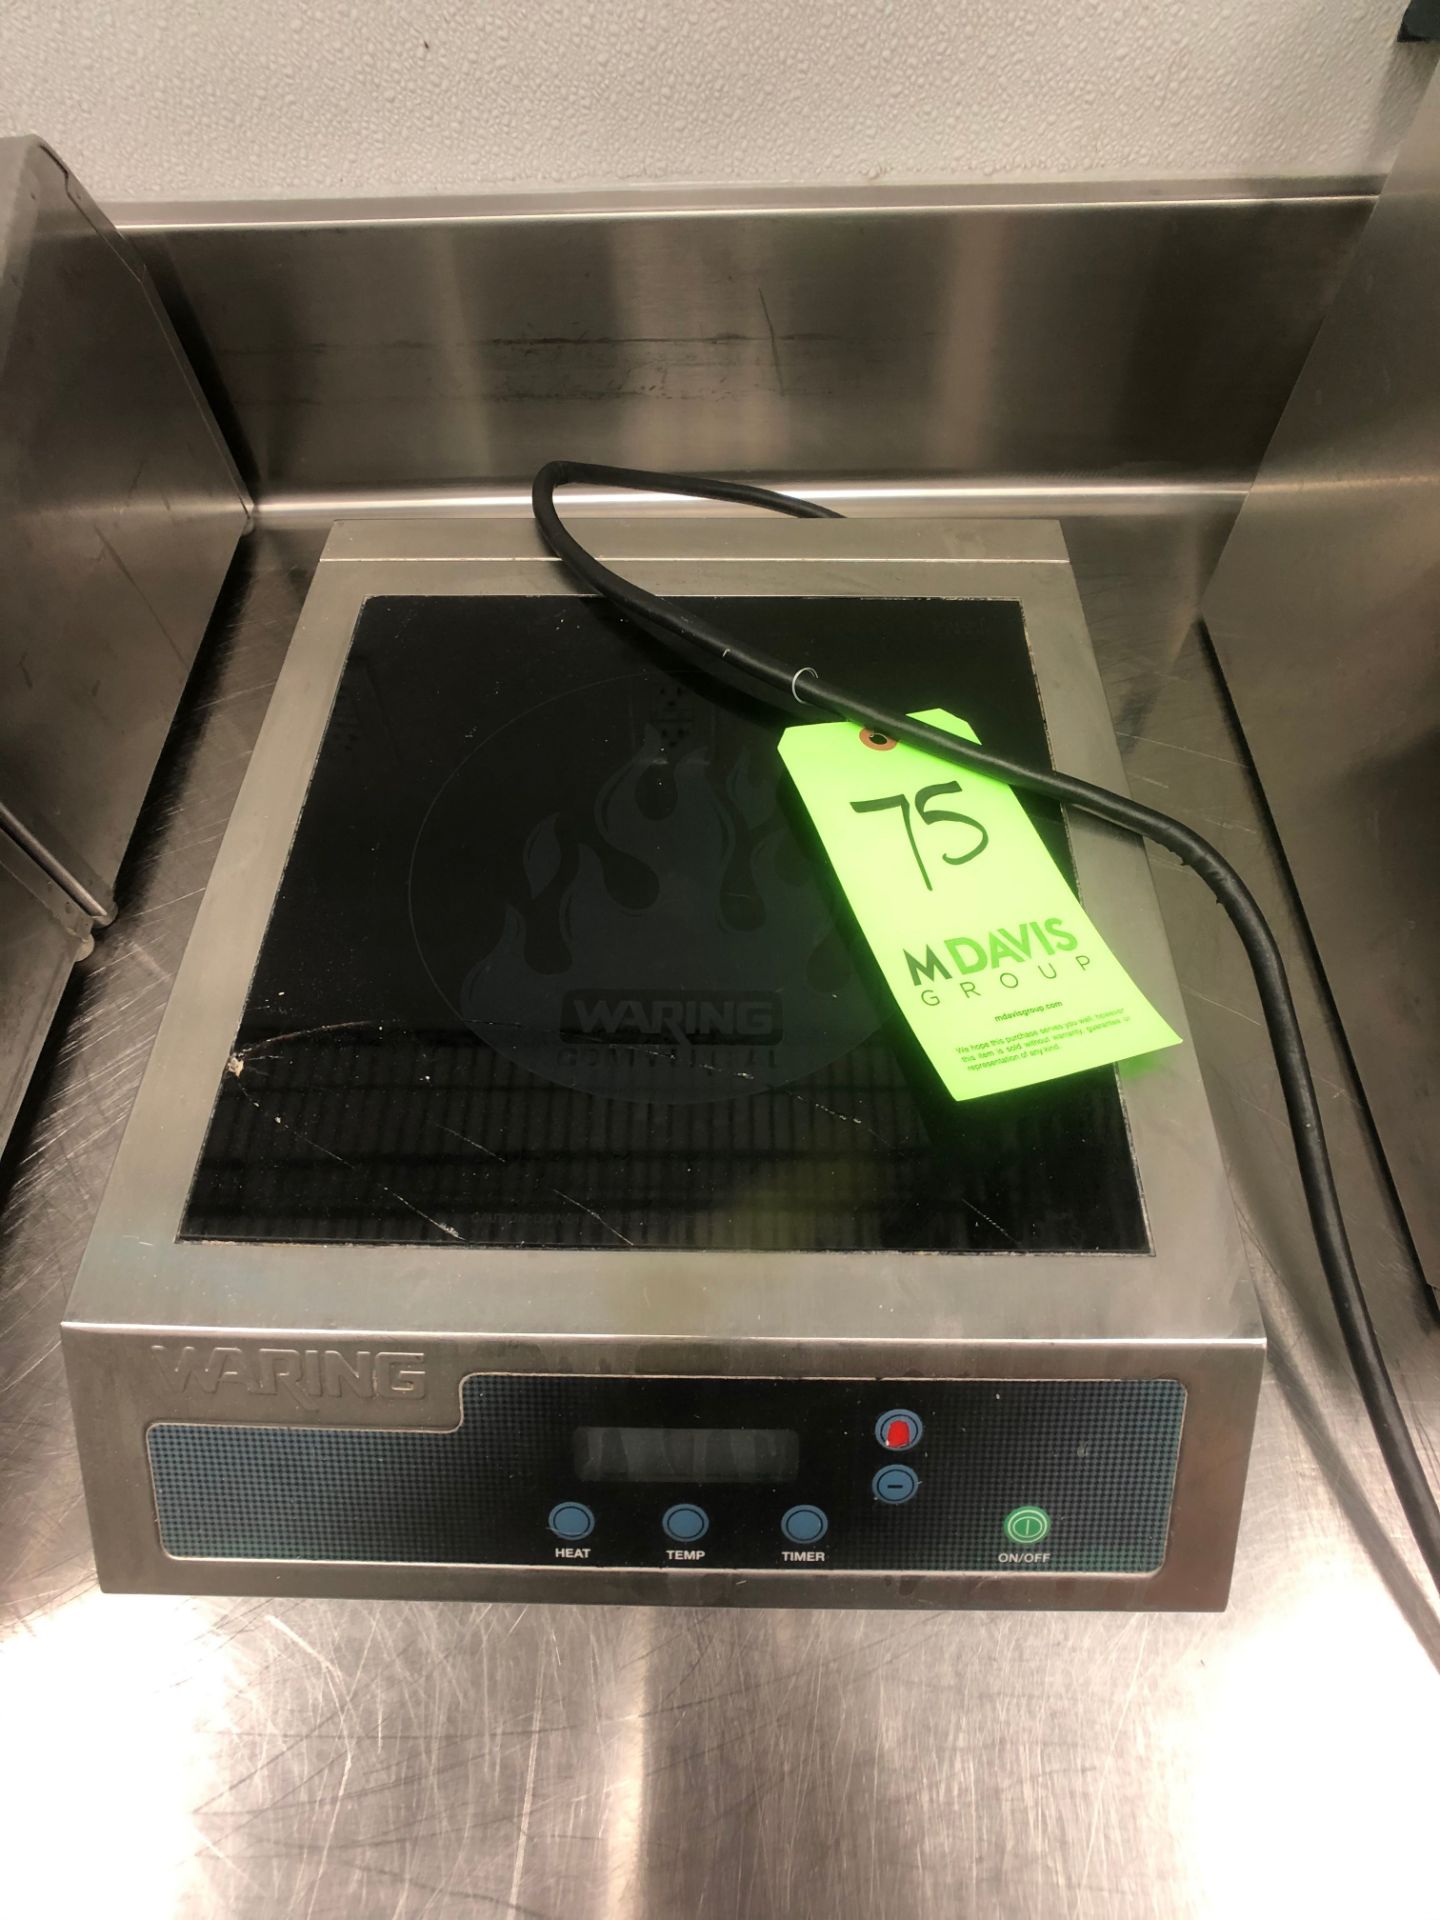 Waring Commercial Induction Range, Model WIH400 (Note: Some Damage to Surface)